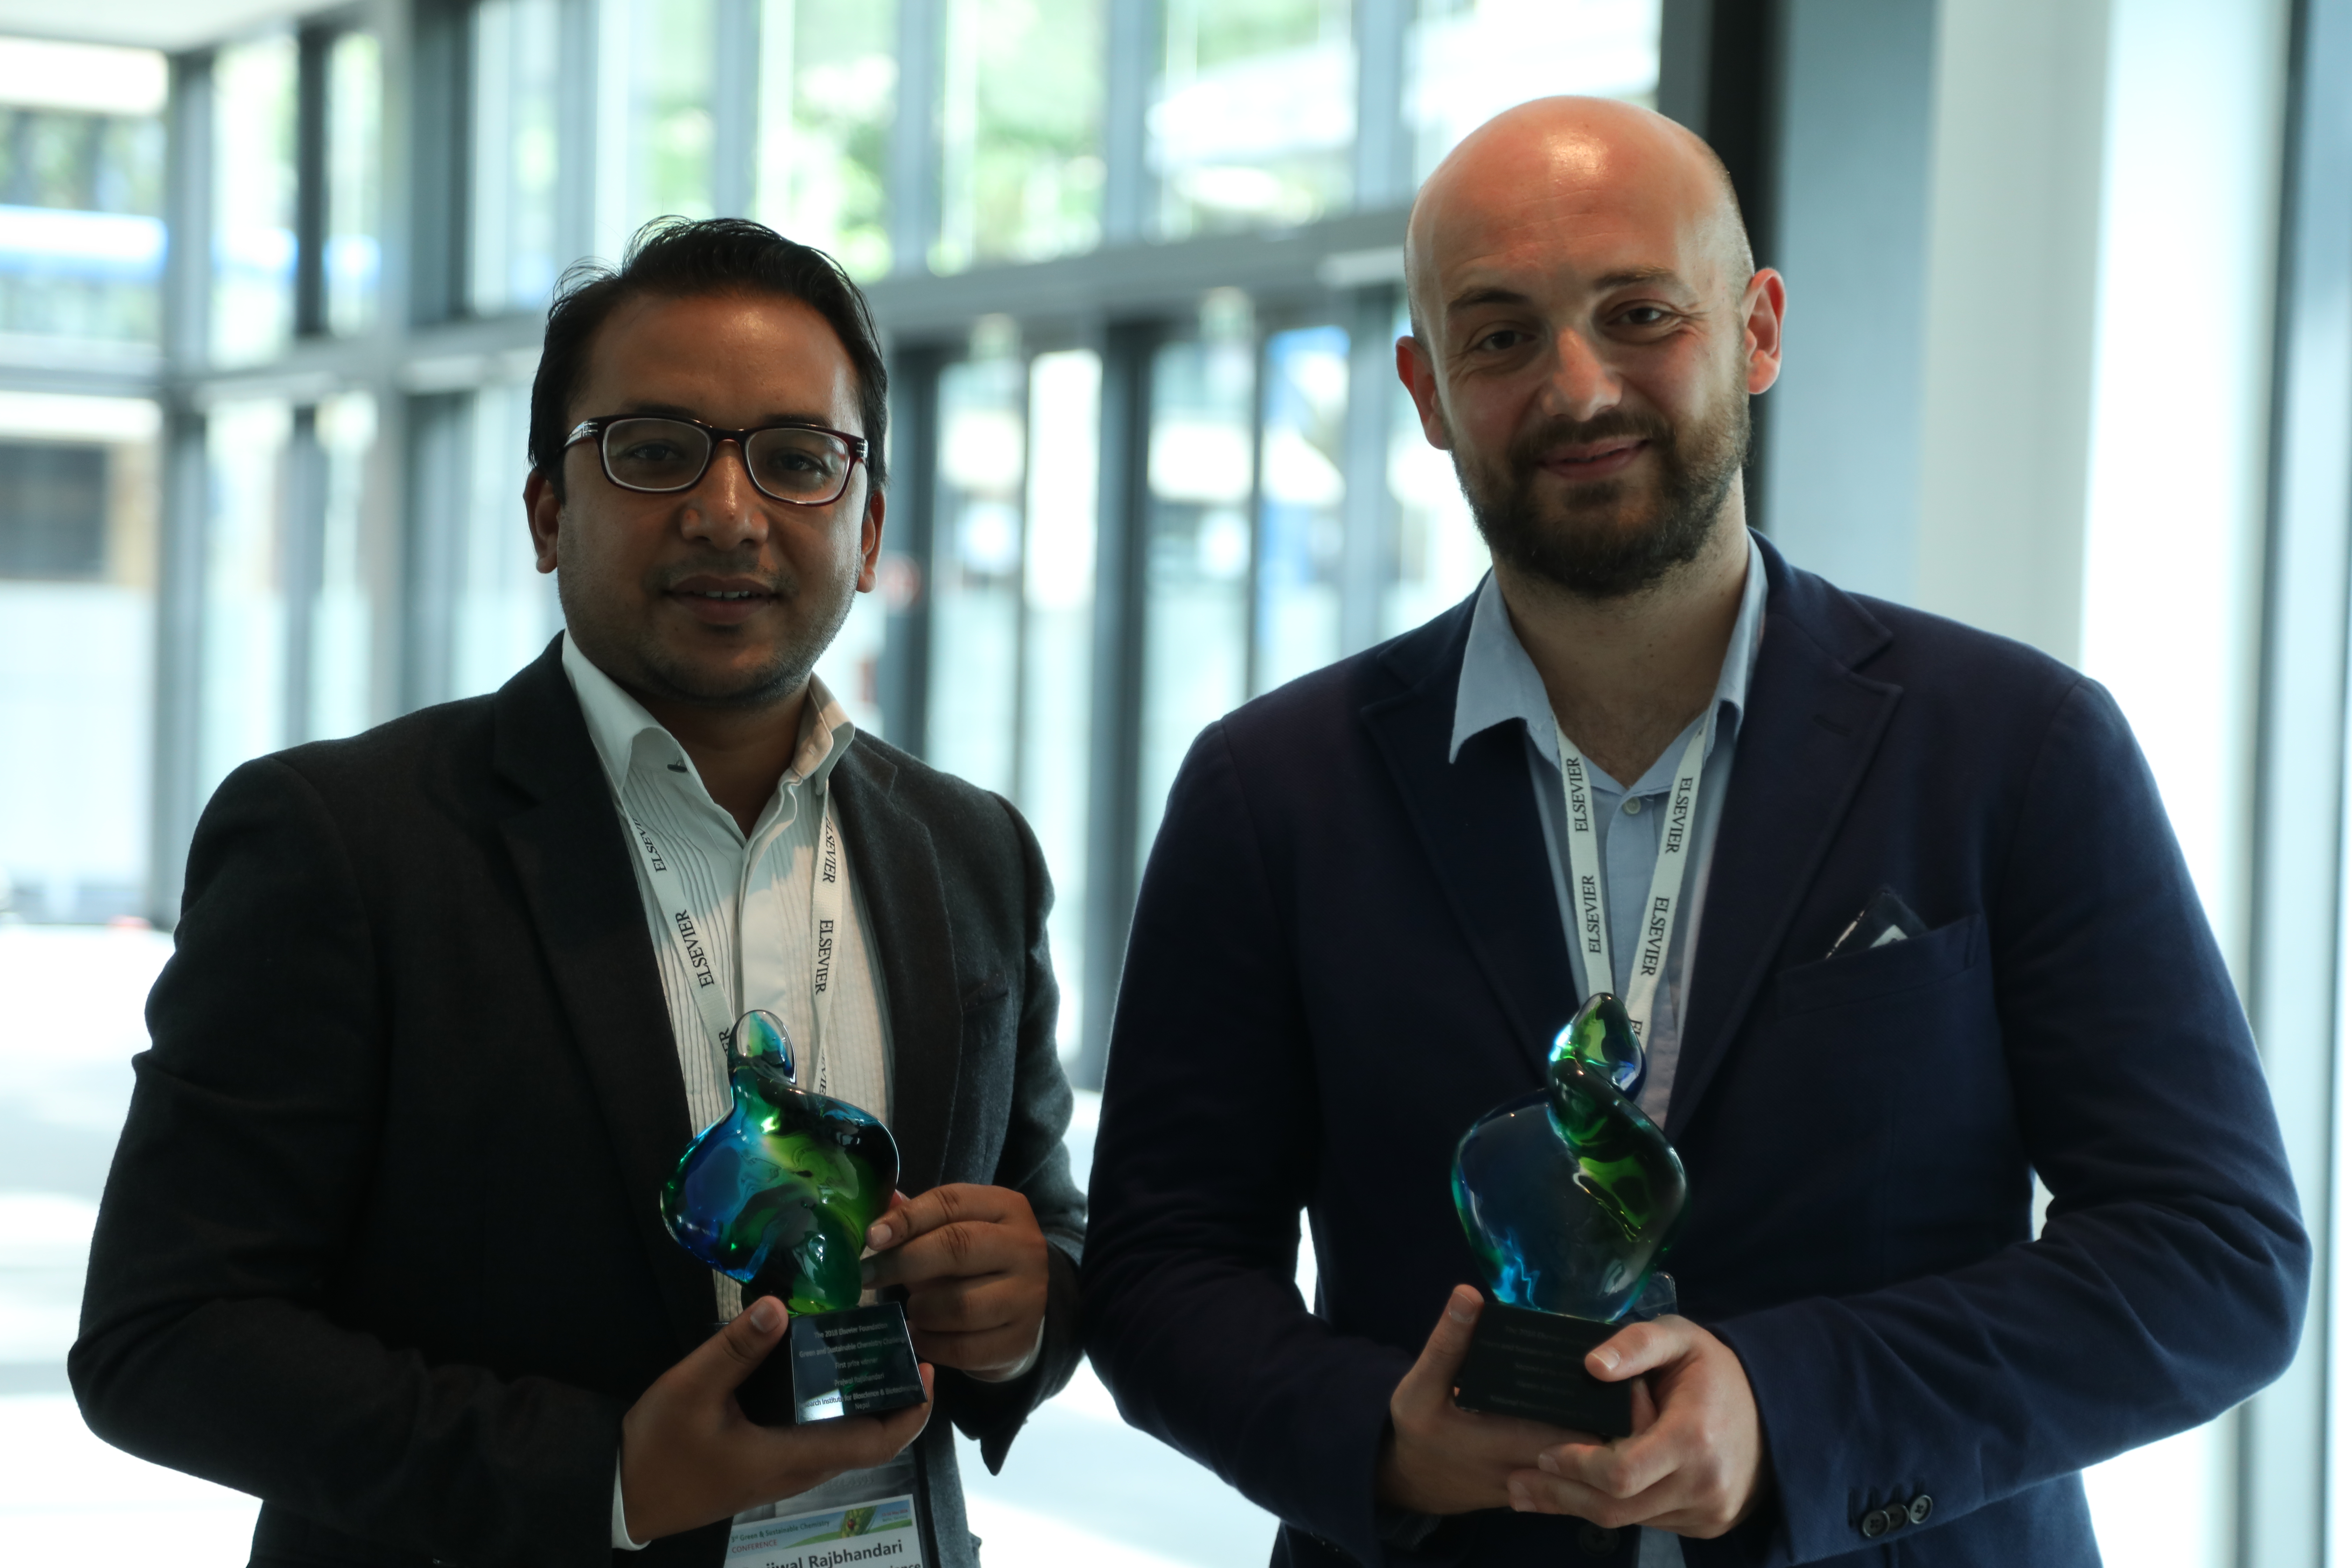 First prize winner Prajwal Rabhindari, President of the Research Institute for Bioscience & Biotechnology (RIBB) in Nepal, and second prize winner Dr. Alessio Adamiano, a researcher at the Italian National Research Council (CNR), pose with their awards.